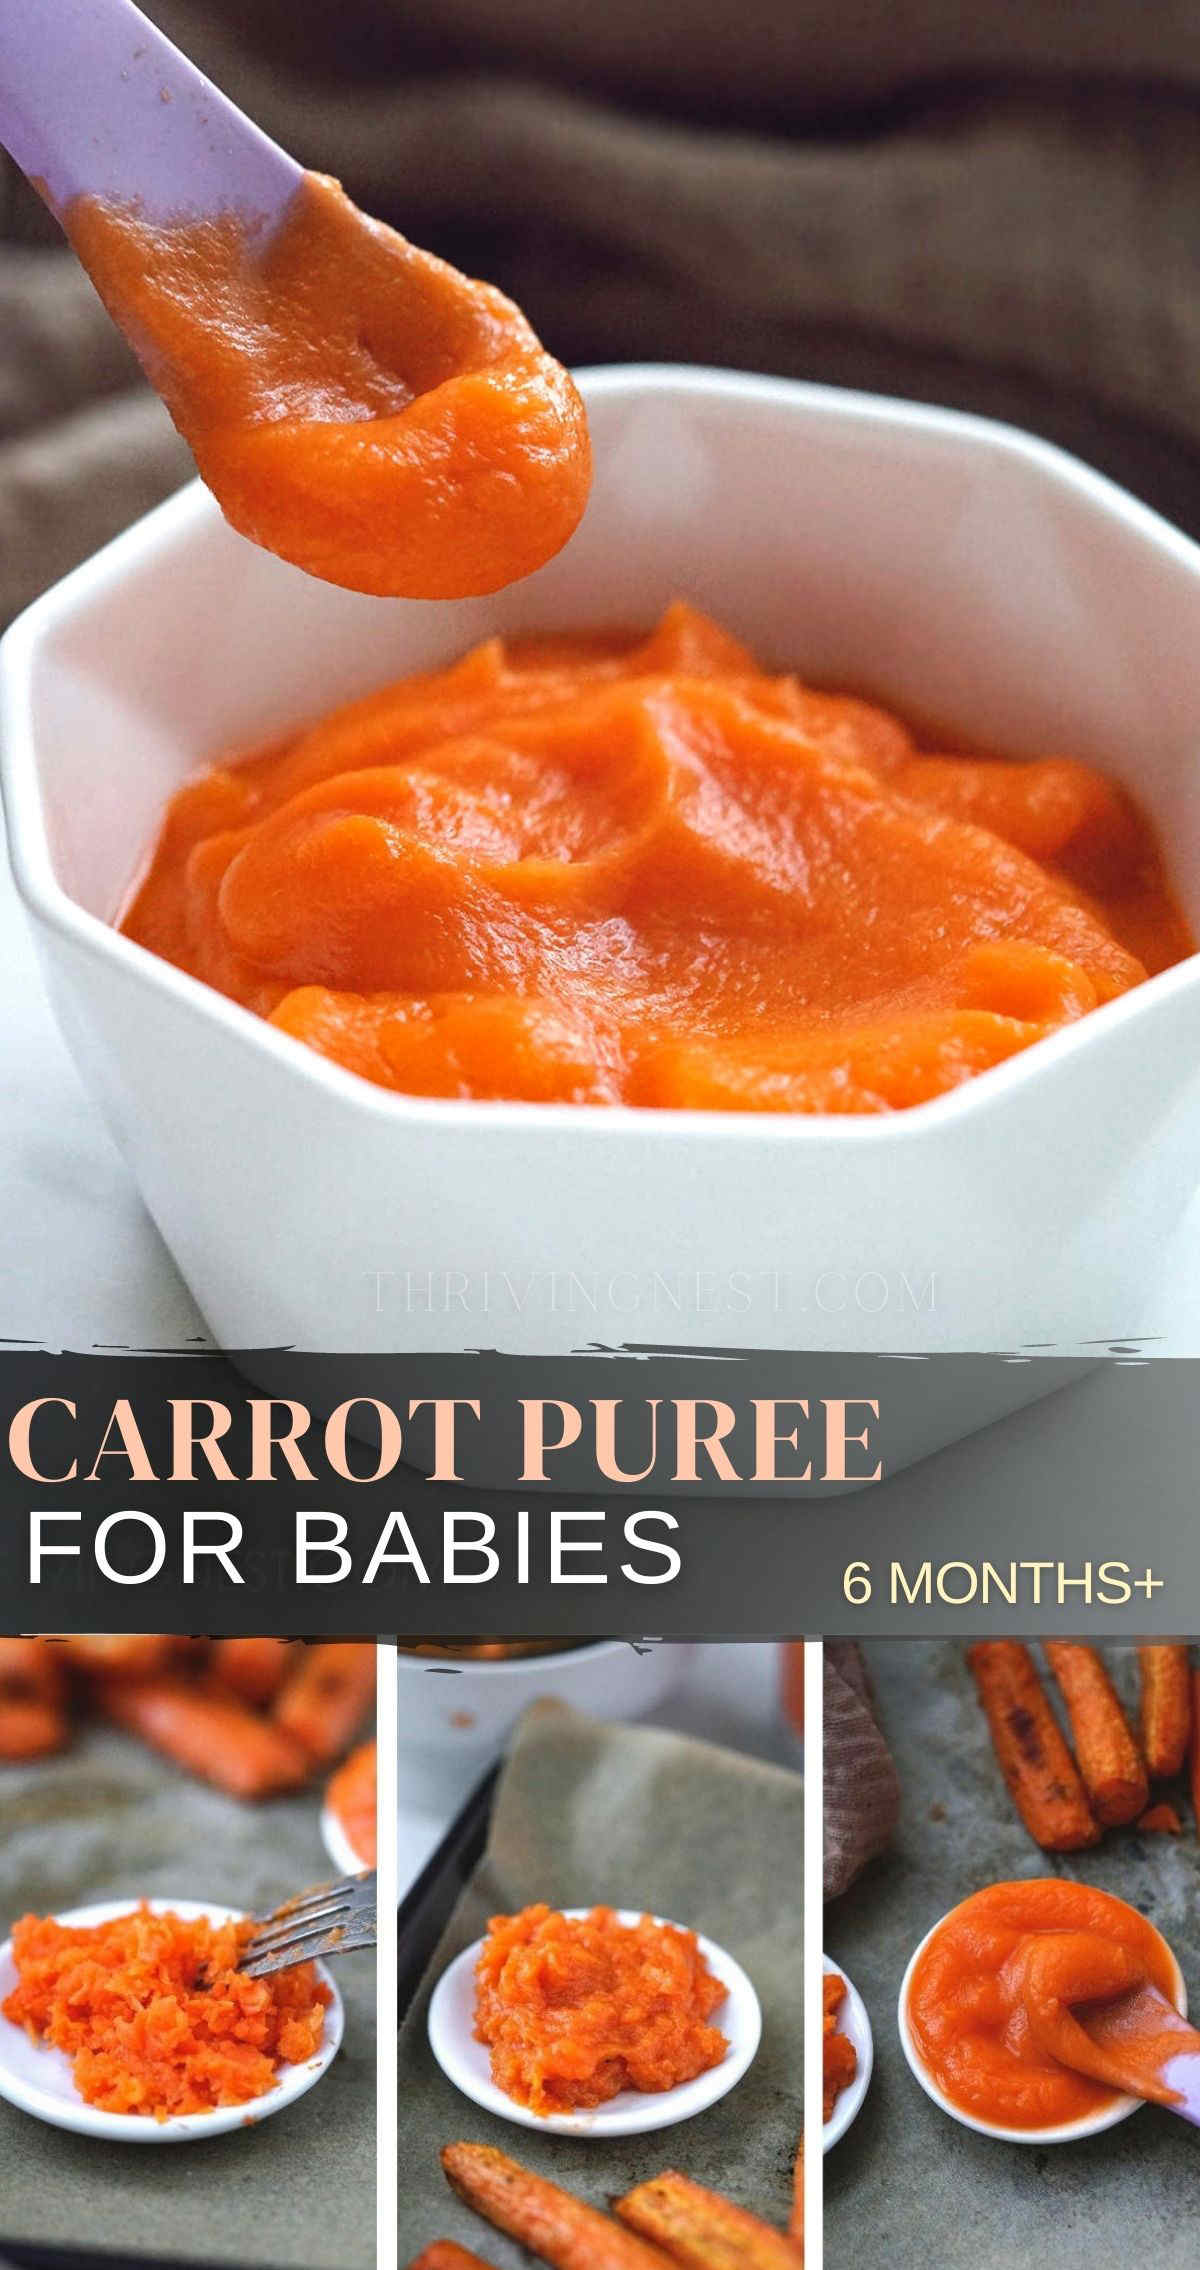 Serving carrot puree for babies is one of the best ways to introduce and prepare carrots for babies at an early age. Due to it's nutritional profile and sweet taste, carrot puree makes a great stage 1 baby food for 6 months old babies. Usually the carrot puree is well accepted whether is served alone or incorporated in other foods. Here is how to make carrot puree for babies by age. #carrotpuree #pureecarrots #babycarrotpuree #carrotpureeforbaby #stage1babyfood #stage1puree #babyfood #6months